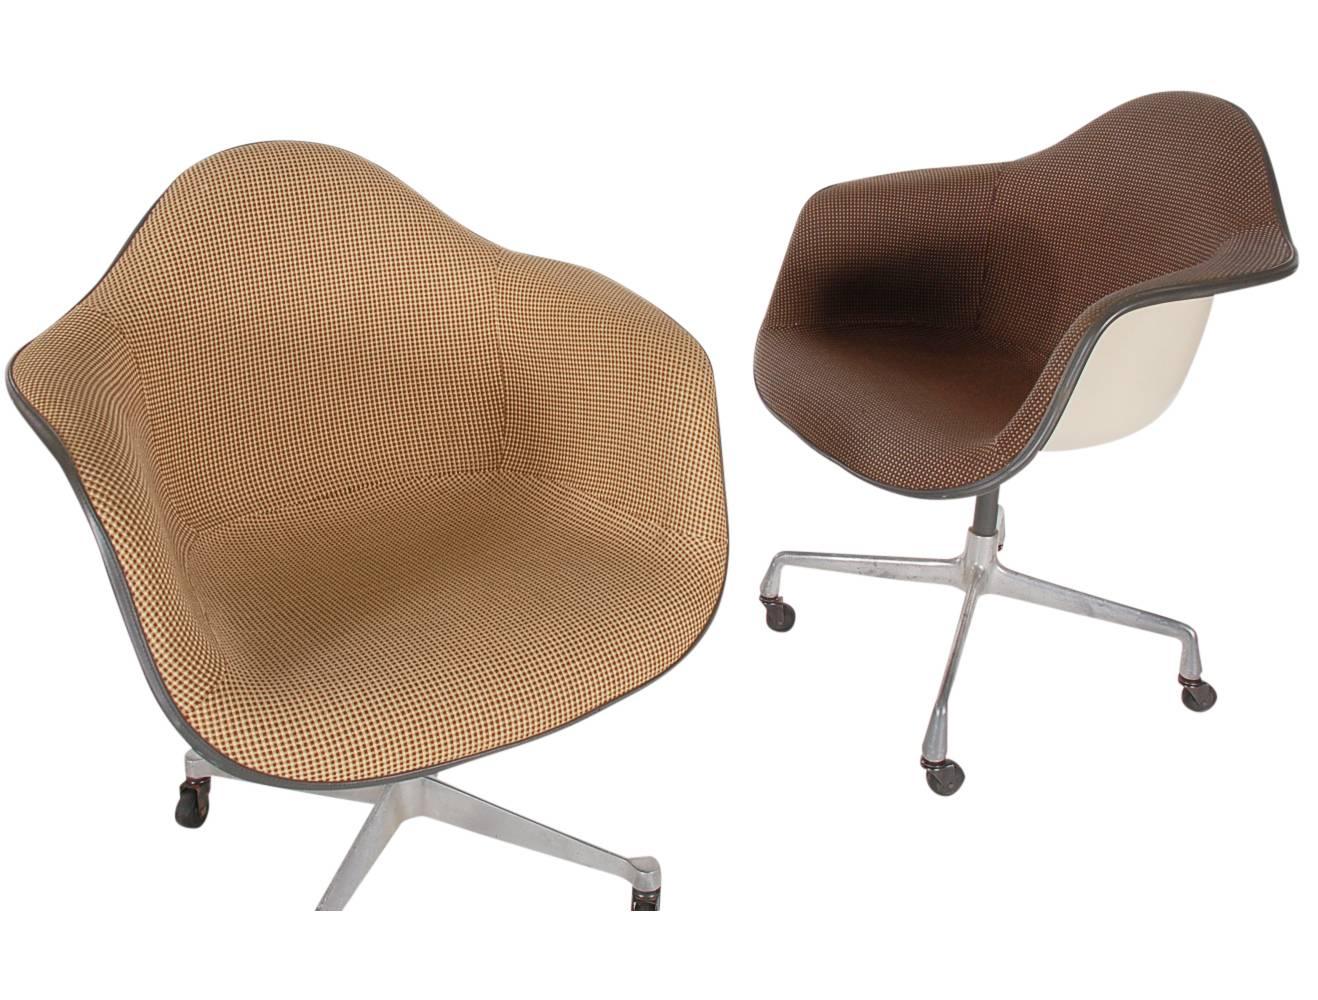 American Pair of Mid-Century Modern Charles Eames Herman Miller Office Chairs on Casters